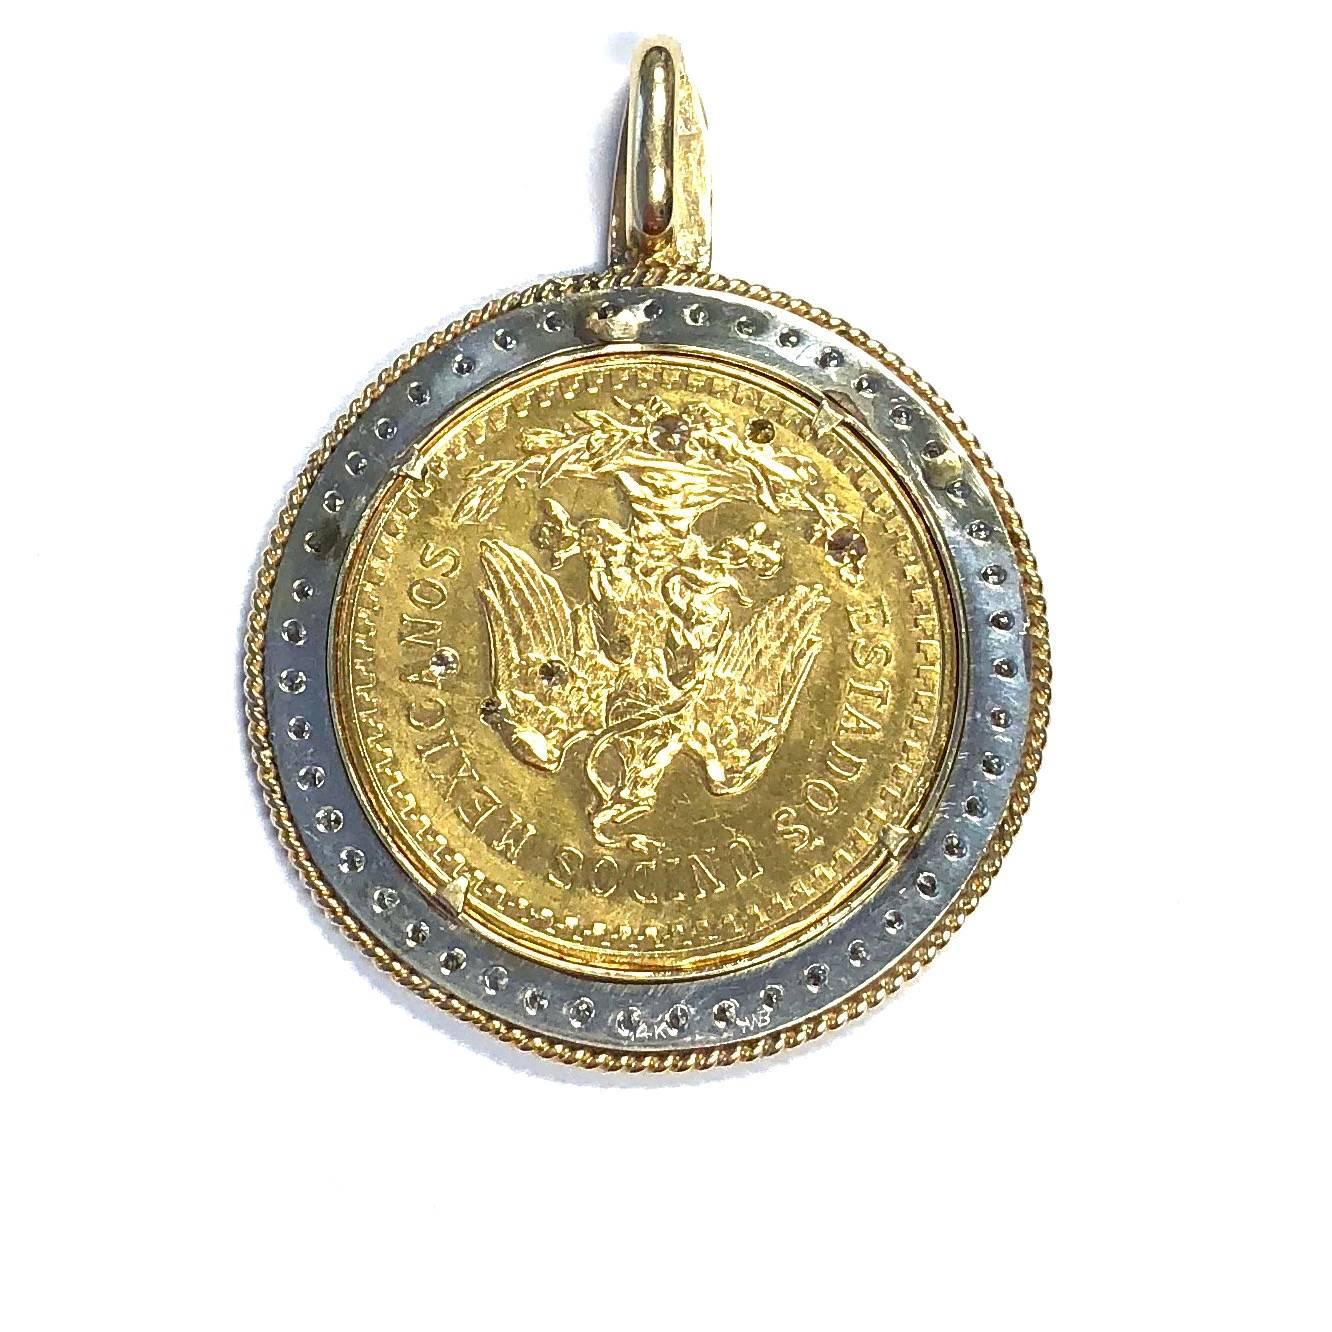 The pendant features a 50 Pesos coin with 6 diamonds, set in a 14K white gold diamond inner bezel and a 14K yellow gold rope outer bezel. The Centenario is a Mexican gold bullion coin first minted in 1921 to commemorate the 100th anniversary of